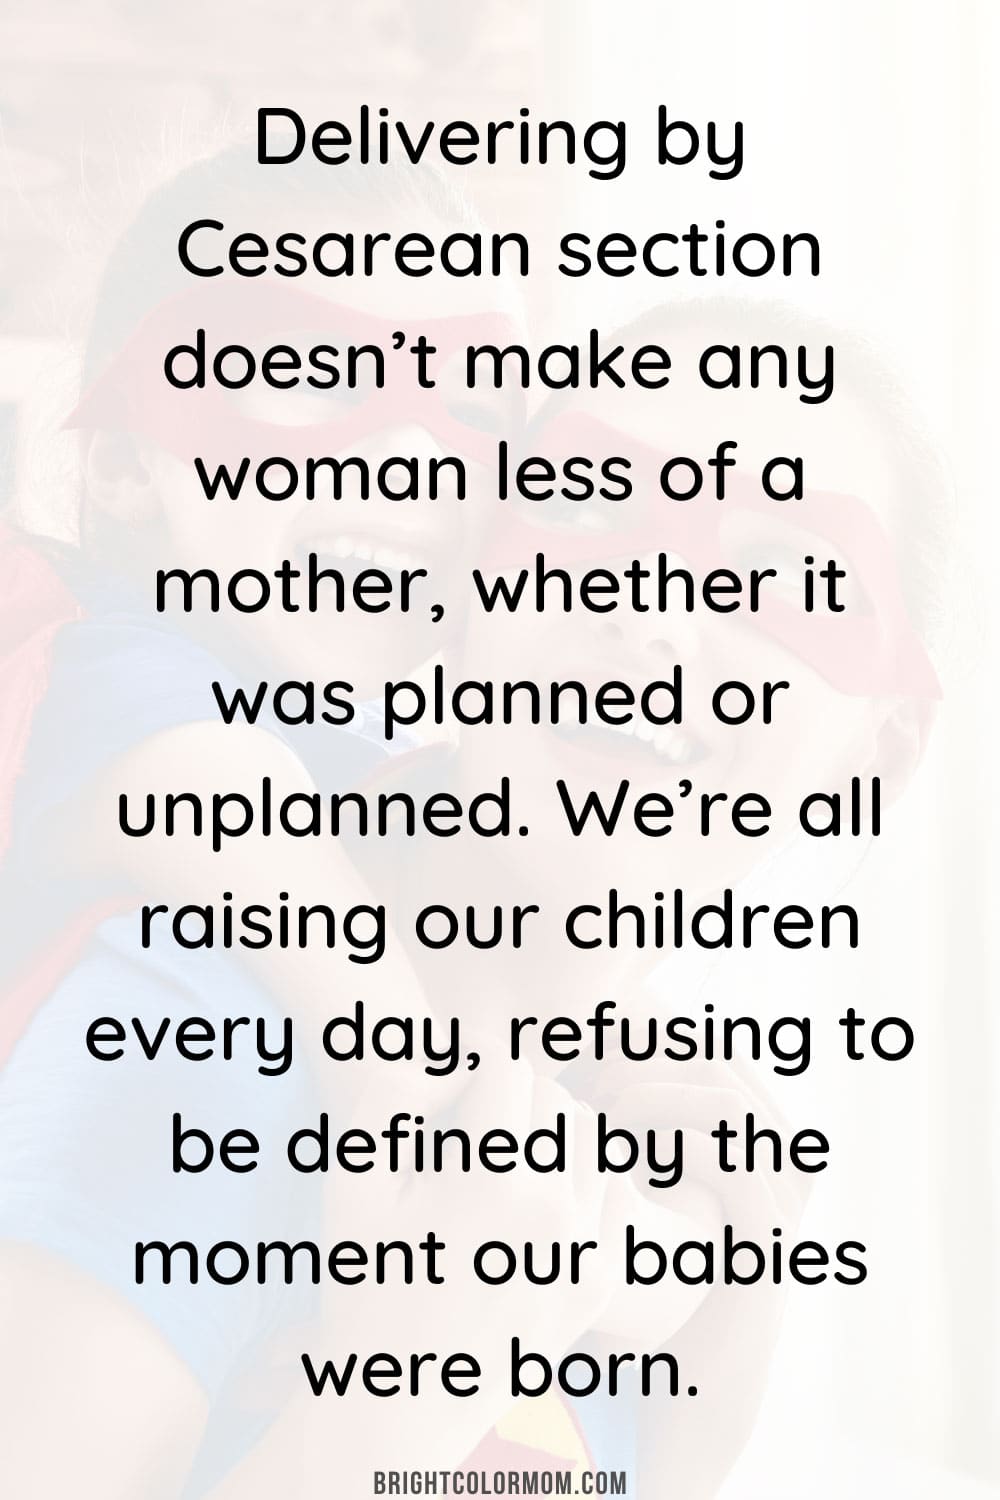 Delivering by Cesarean section doesn’t make any woman less of a mother, whether it was planned or unplanned. We’re all raising our children every day, refusing to be defined by the moment our babies were born.